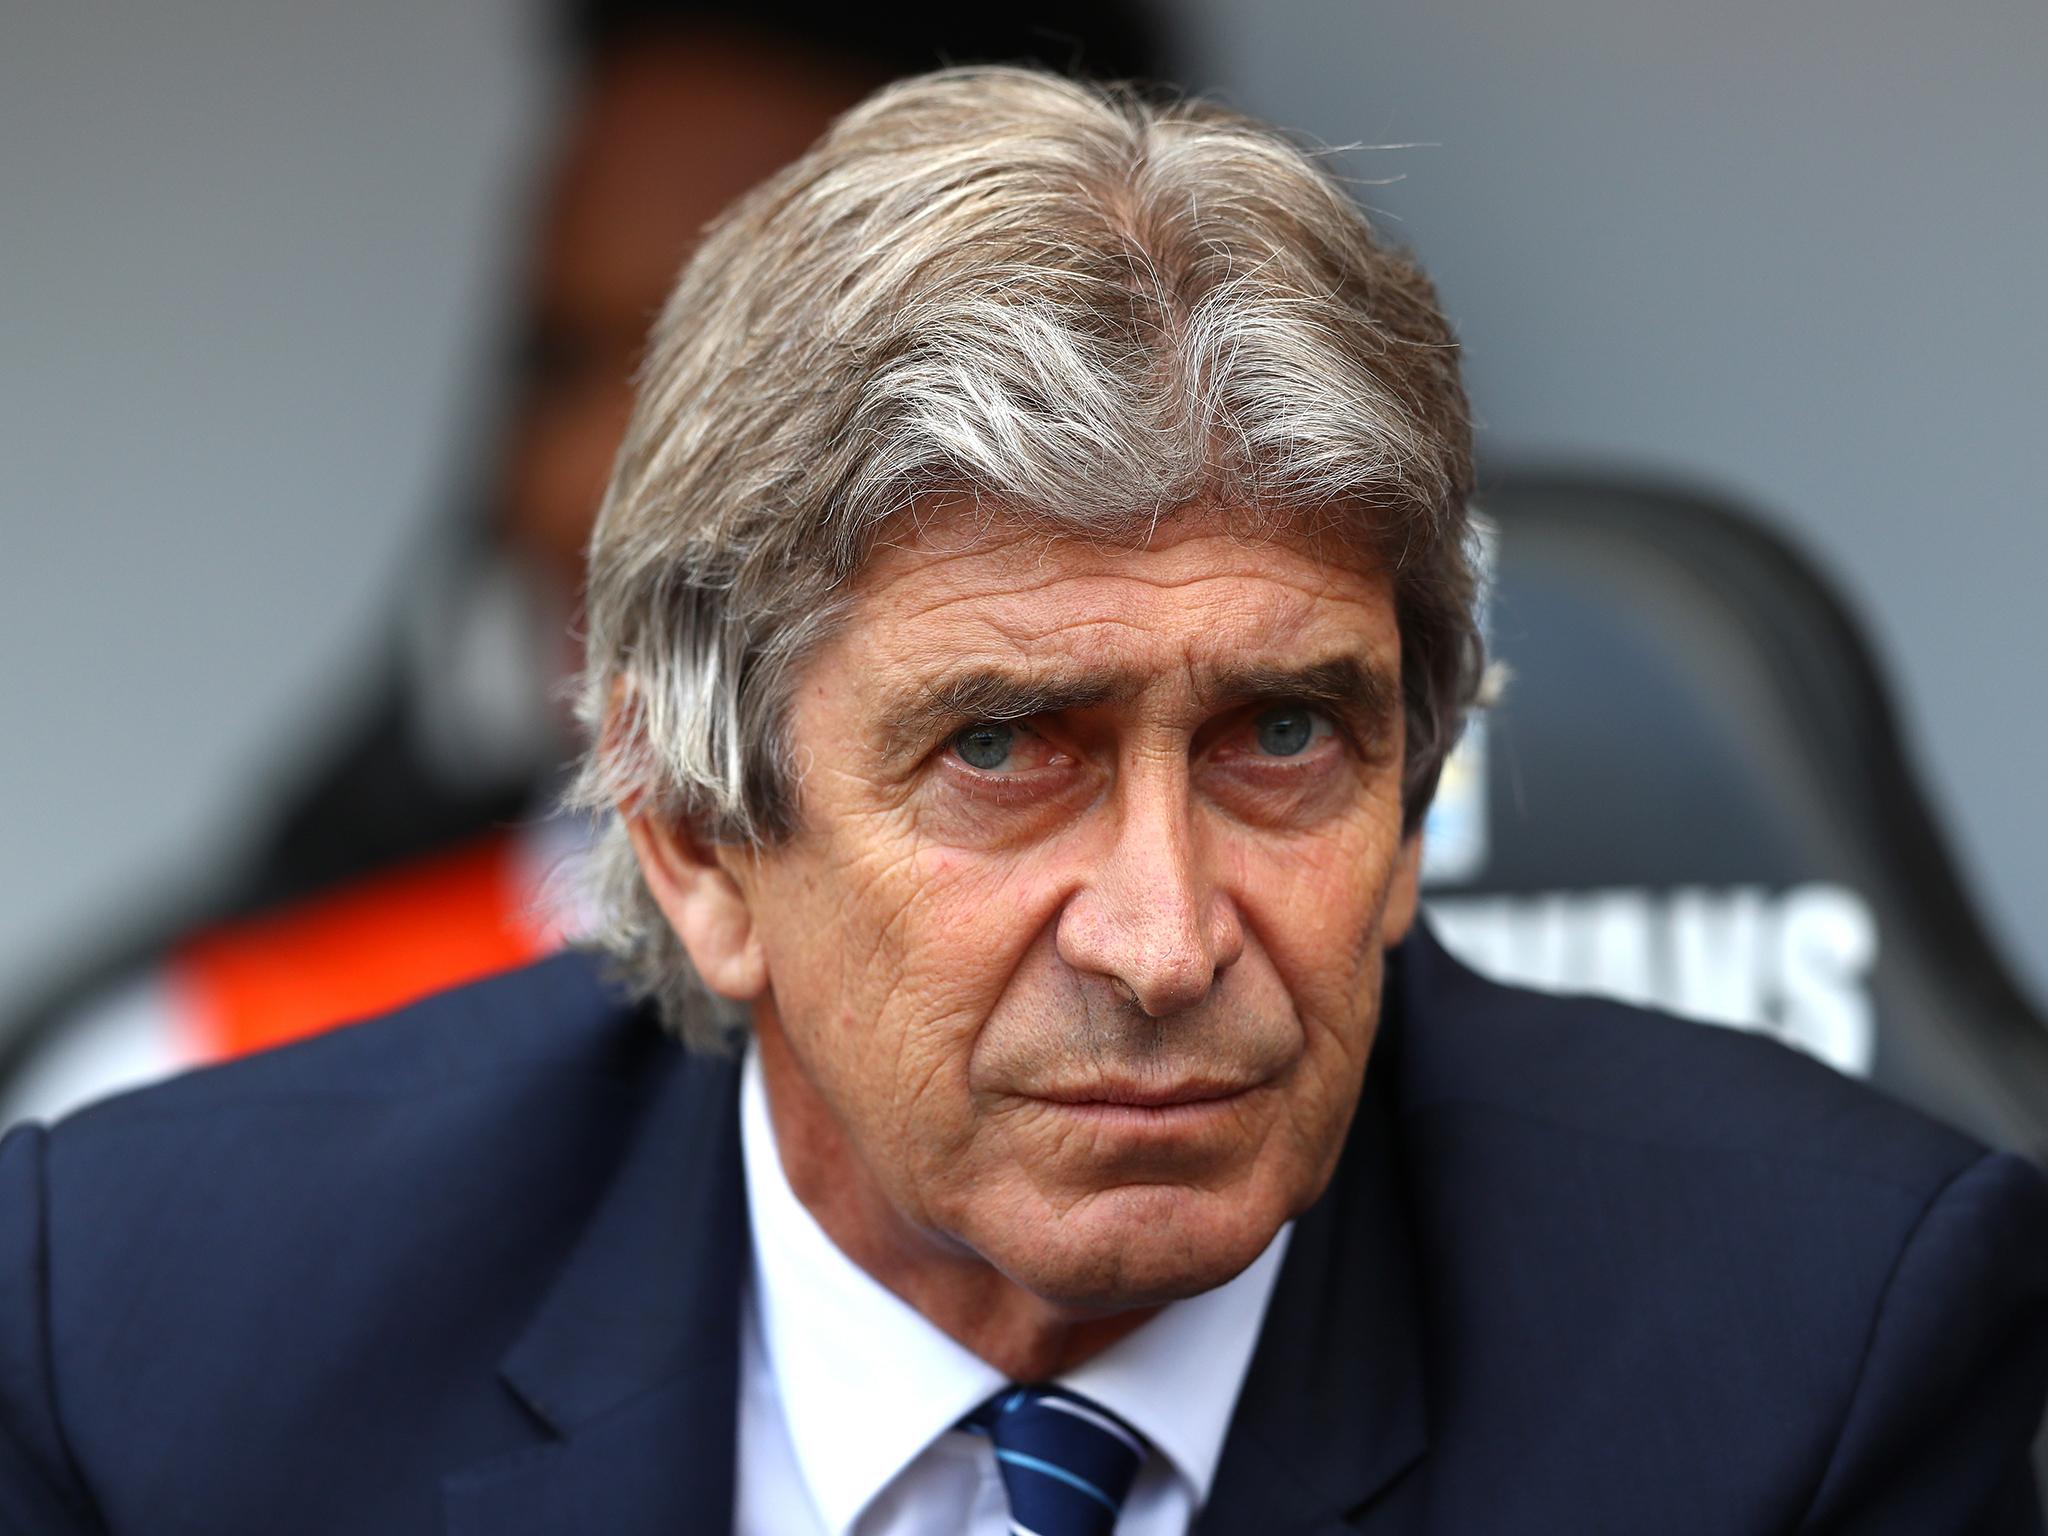 Manuel Pellegrini and wife robbed by armed muggers as West Ham manager thanks Chilean police